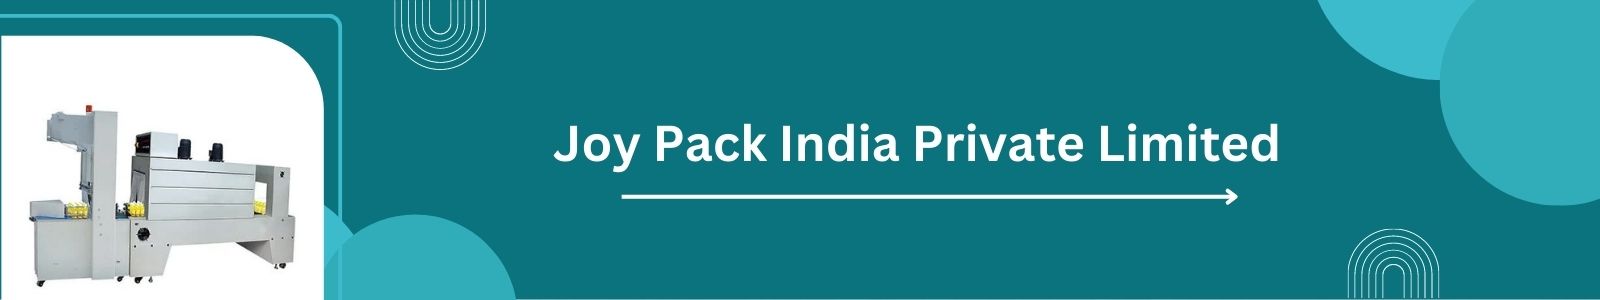 Joy Pack India Private Limited